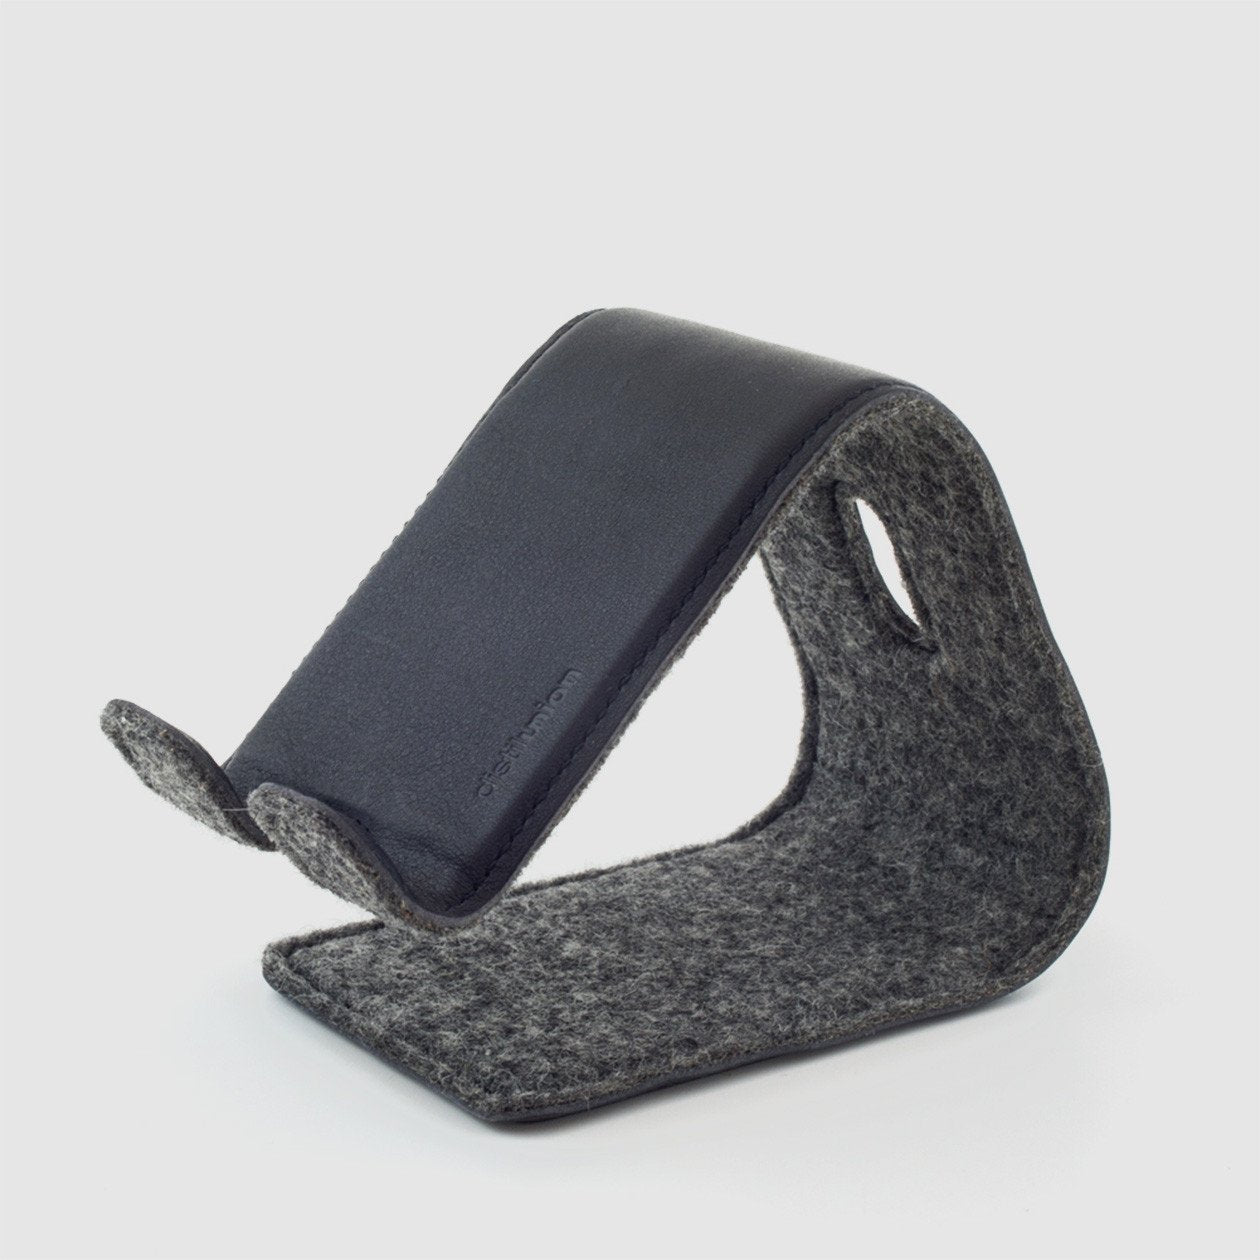 distil stanley stand for phones and tablets made of merino wool and black leather